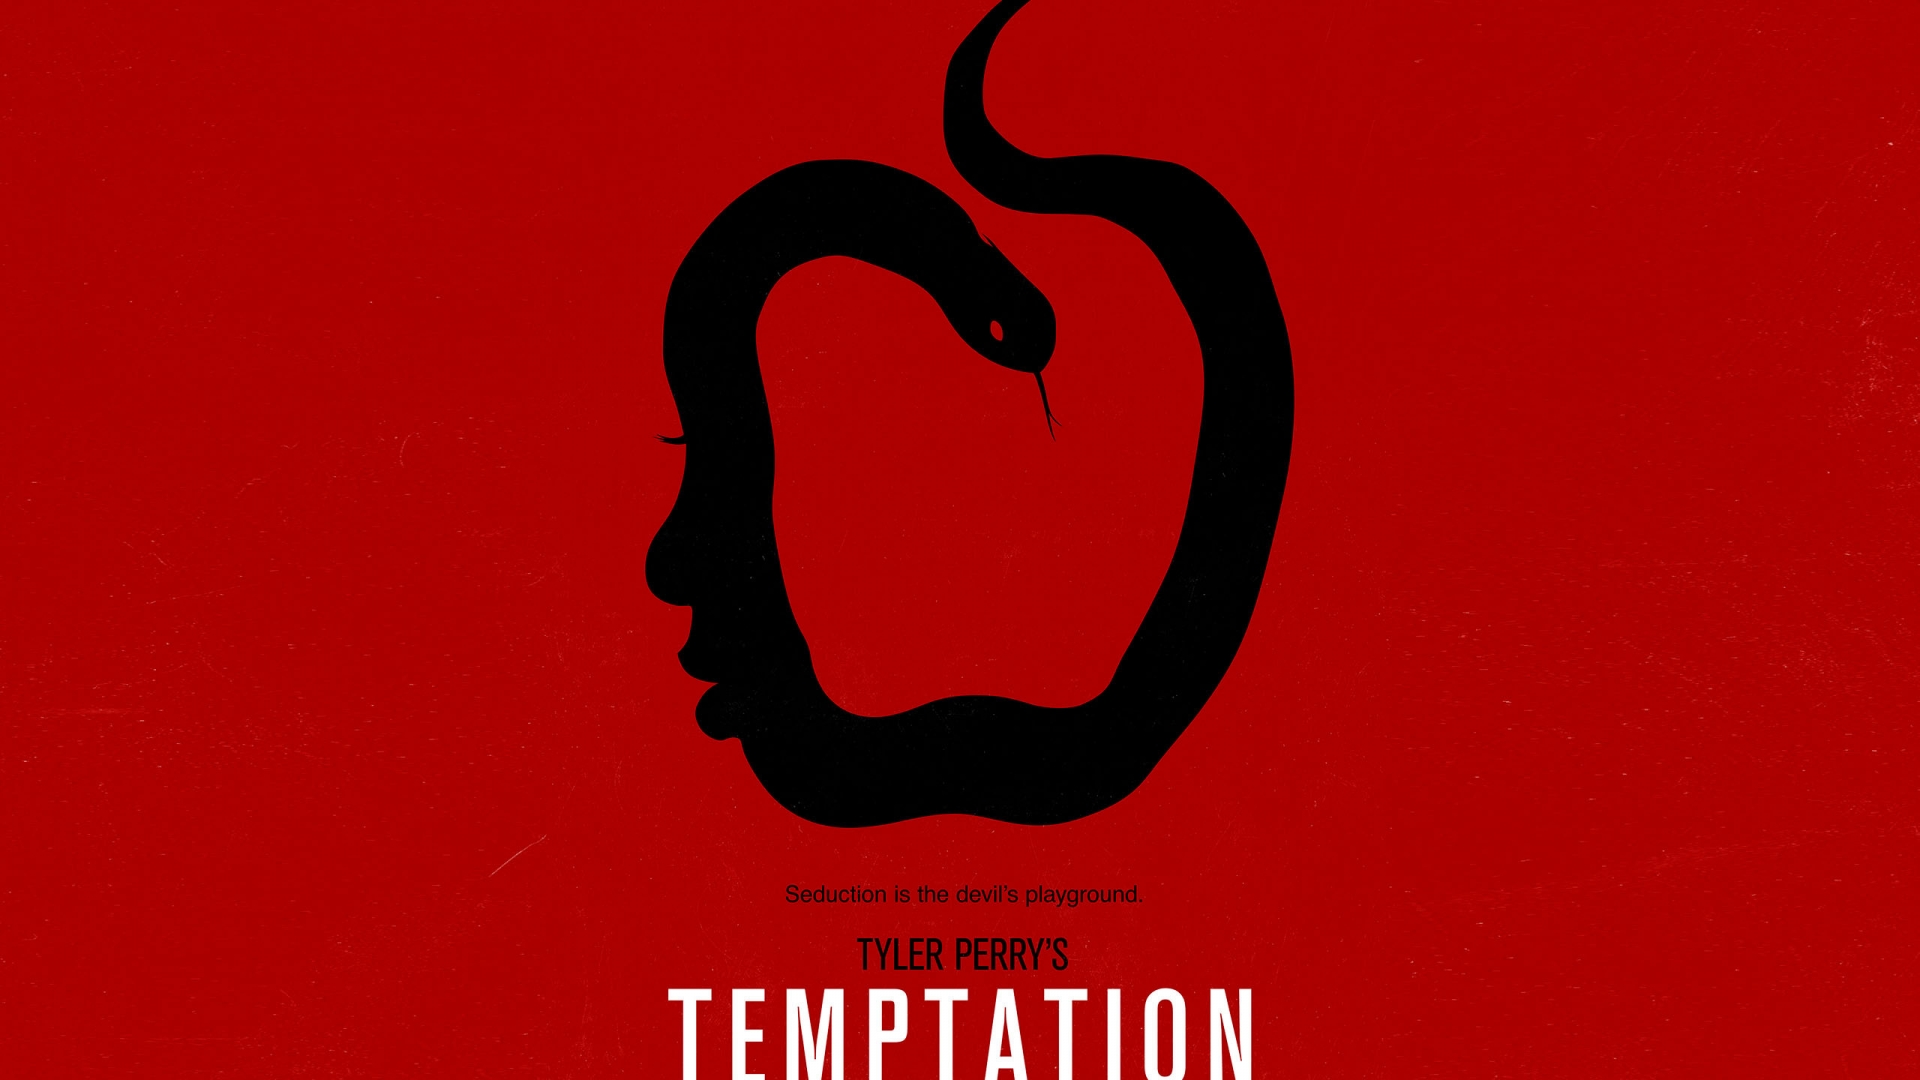 Tyler Perry Temptation for 1920 x 1080 HDTV 1080p resolution